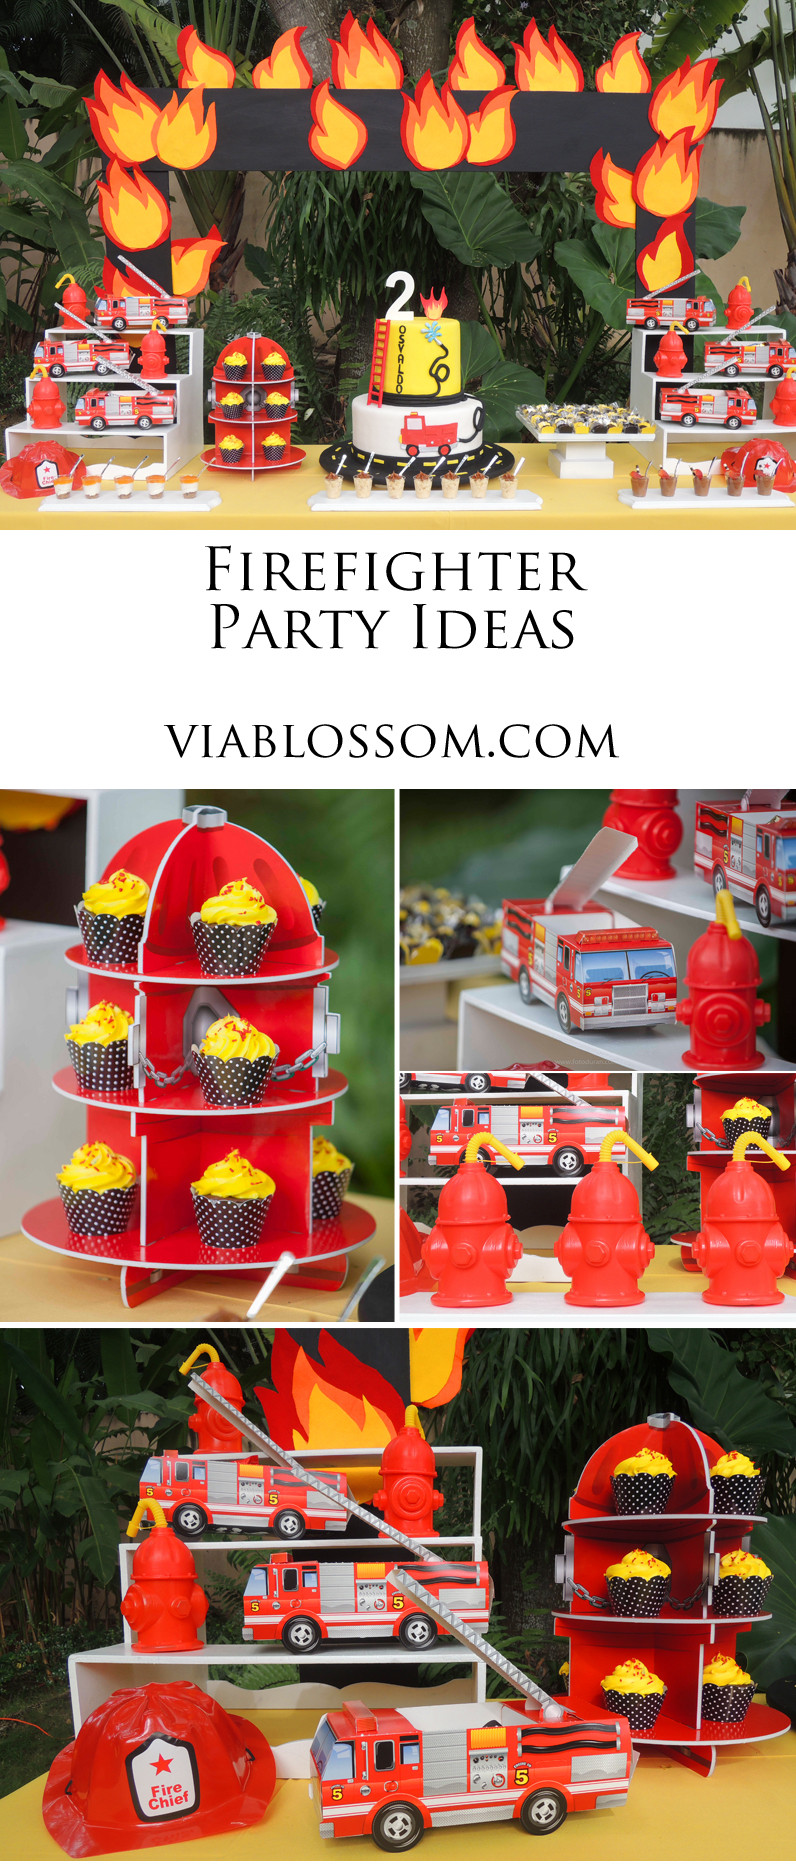 Firefighter Birthday Party Supplies
 Firefighter Birthday Party Via Blossom